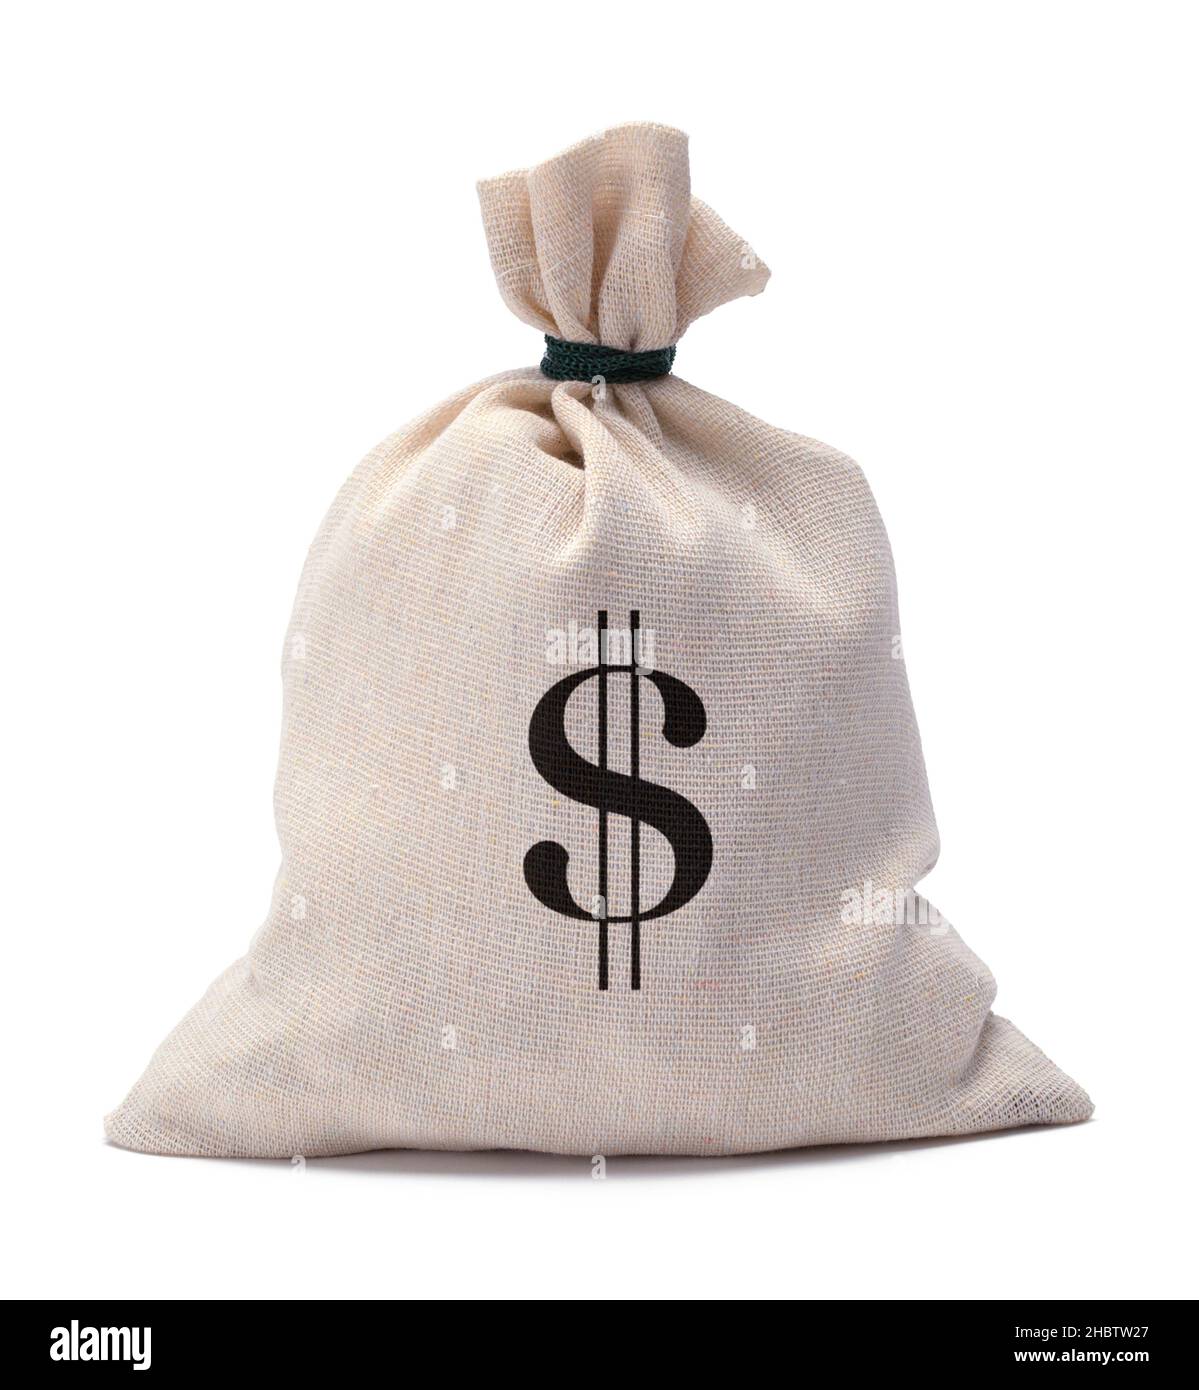 Money Bank Bag with Cash Symbol Cut Out on White. Stock Photo